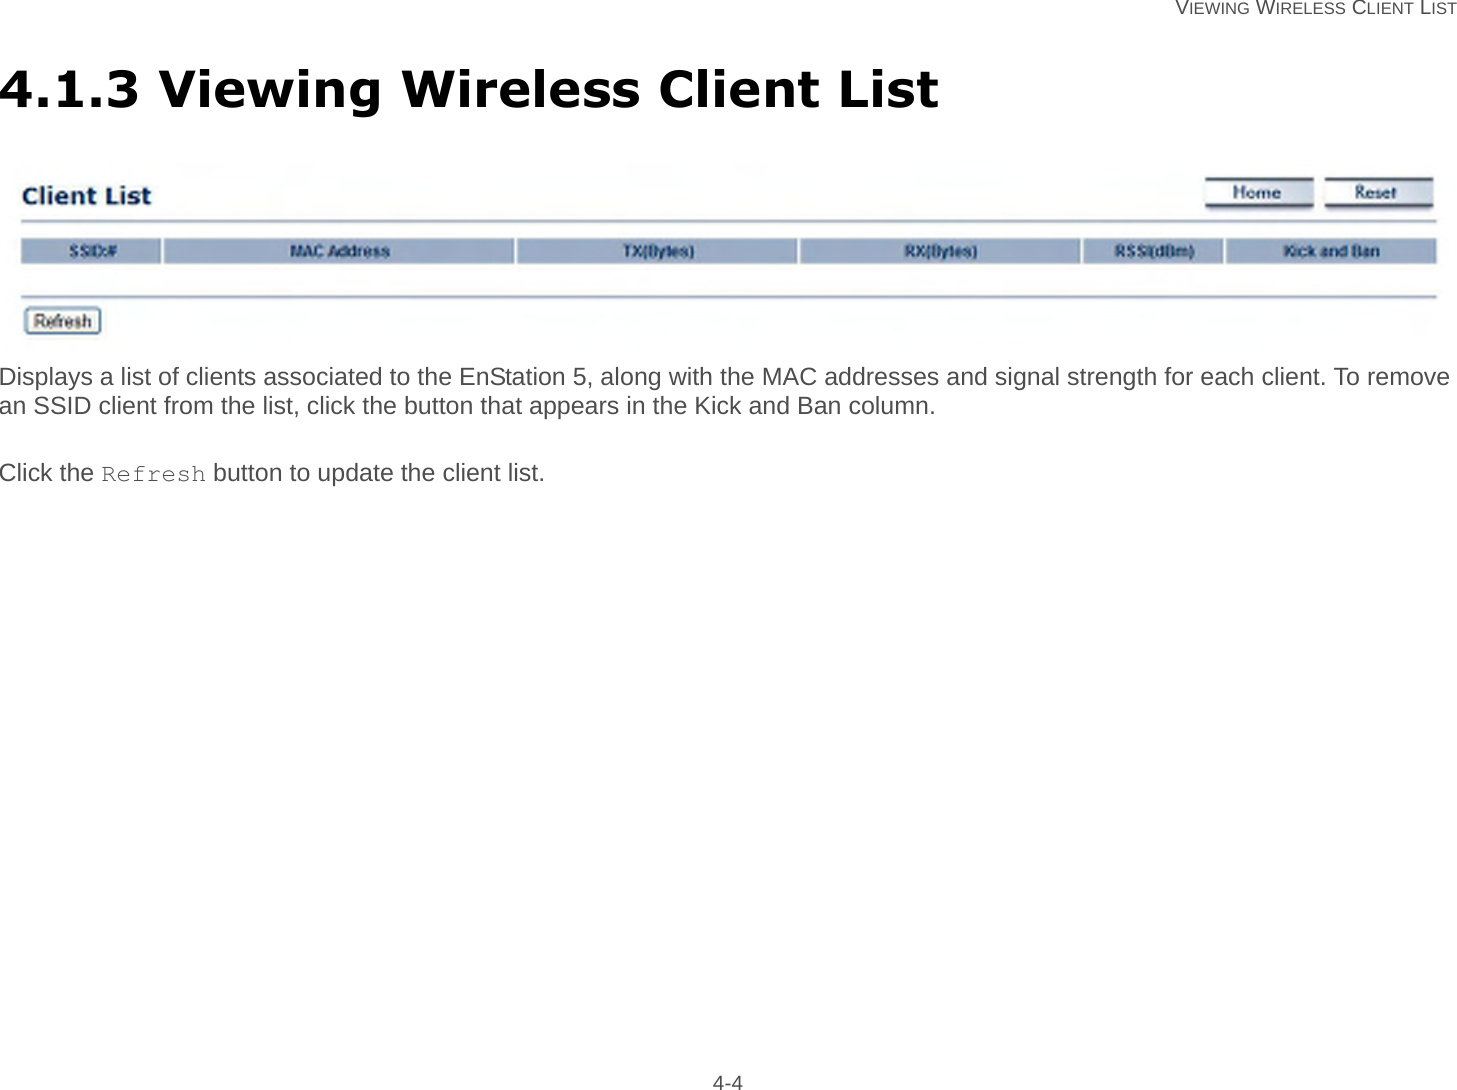   VIEWING WIRELESS CLIENT LIST 4-44.1.3 Viewing Wireless Client ListDisplays a list of clients associated to the EnStation 5, along with the MAC addresses and signal strength for each client. To remove an SSID client from the list, click the button that appears in the Kick and Ban column.Click the Refresh button to update the client list.